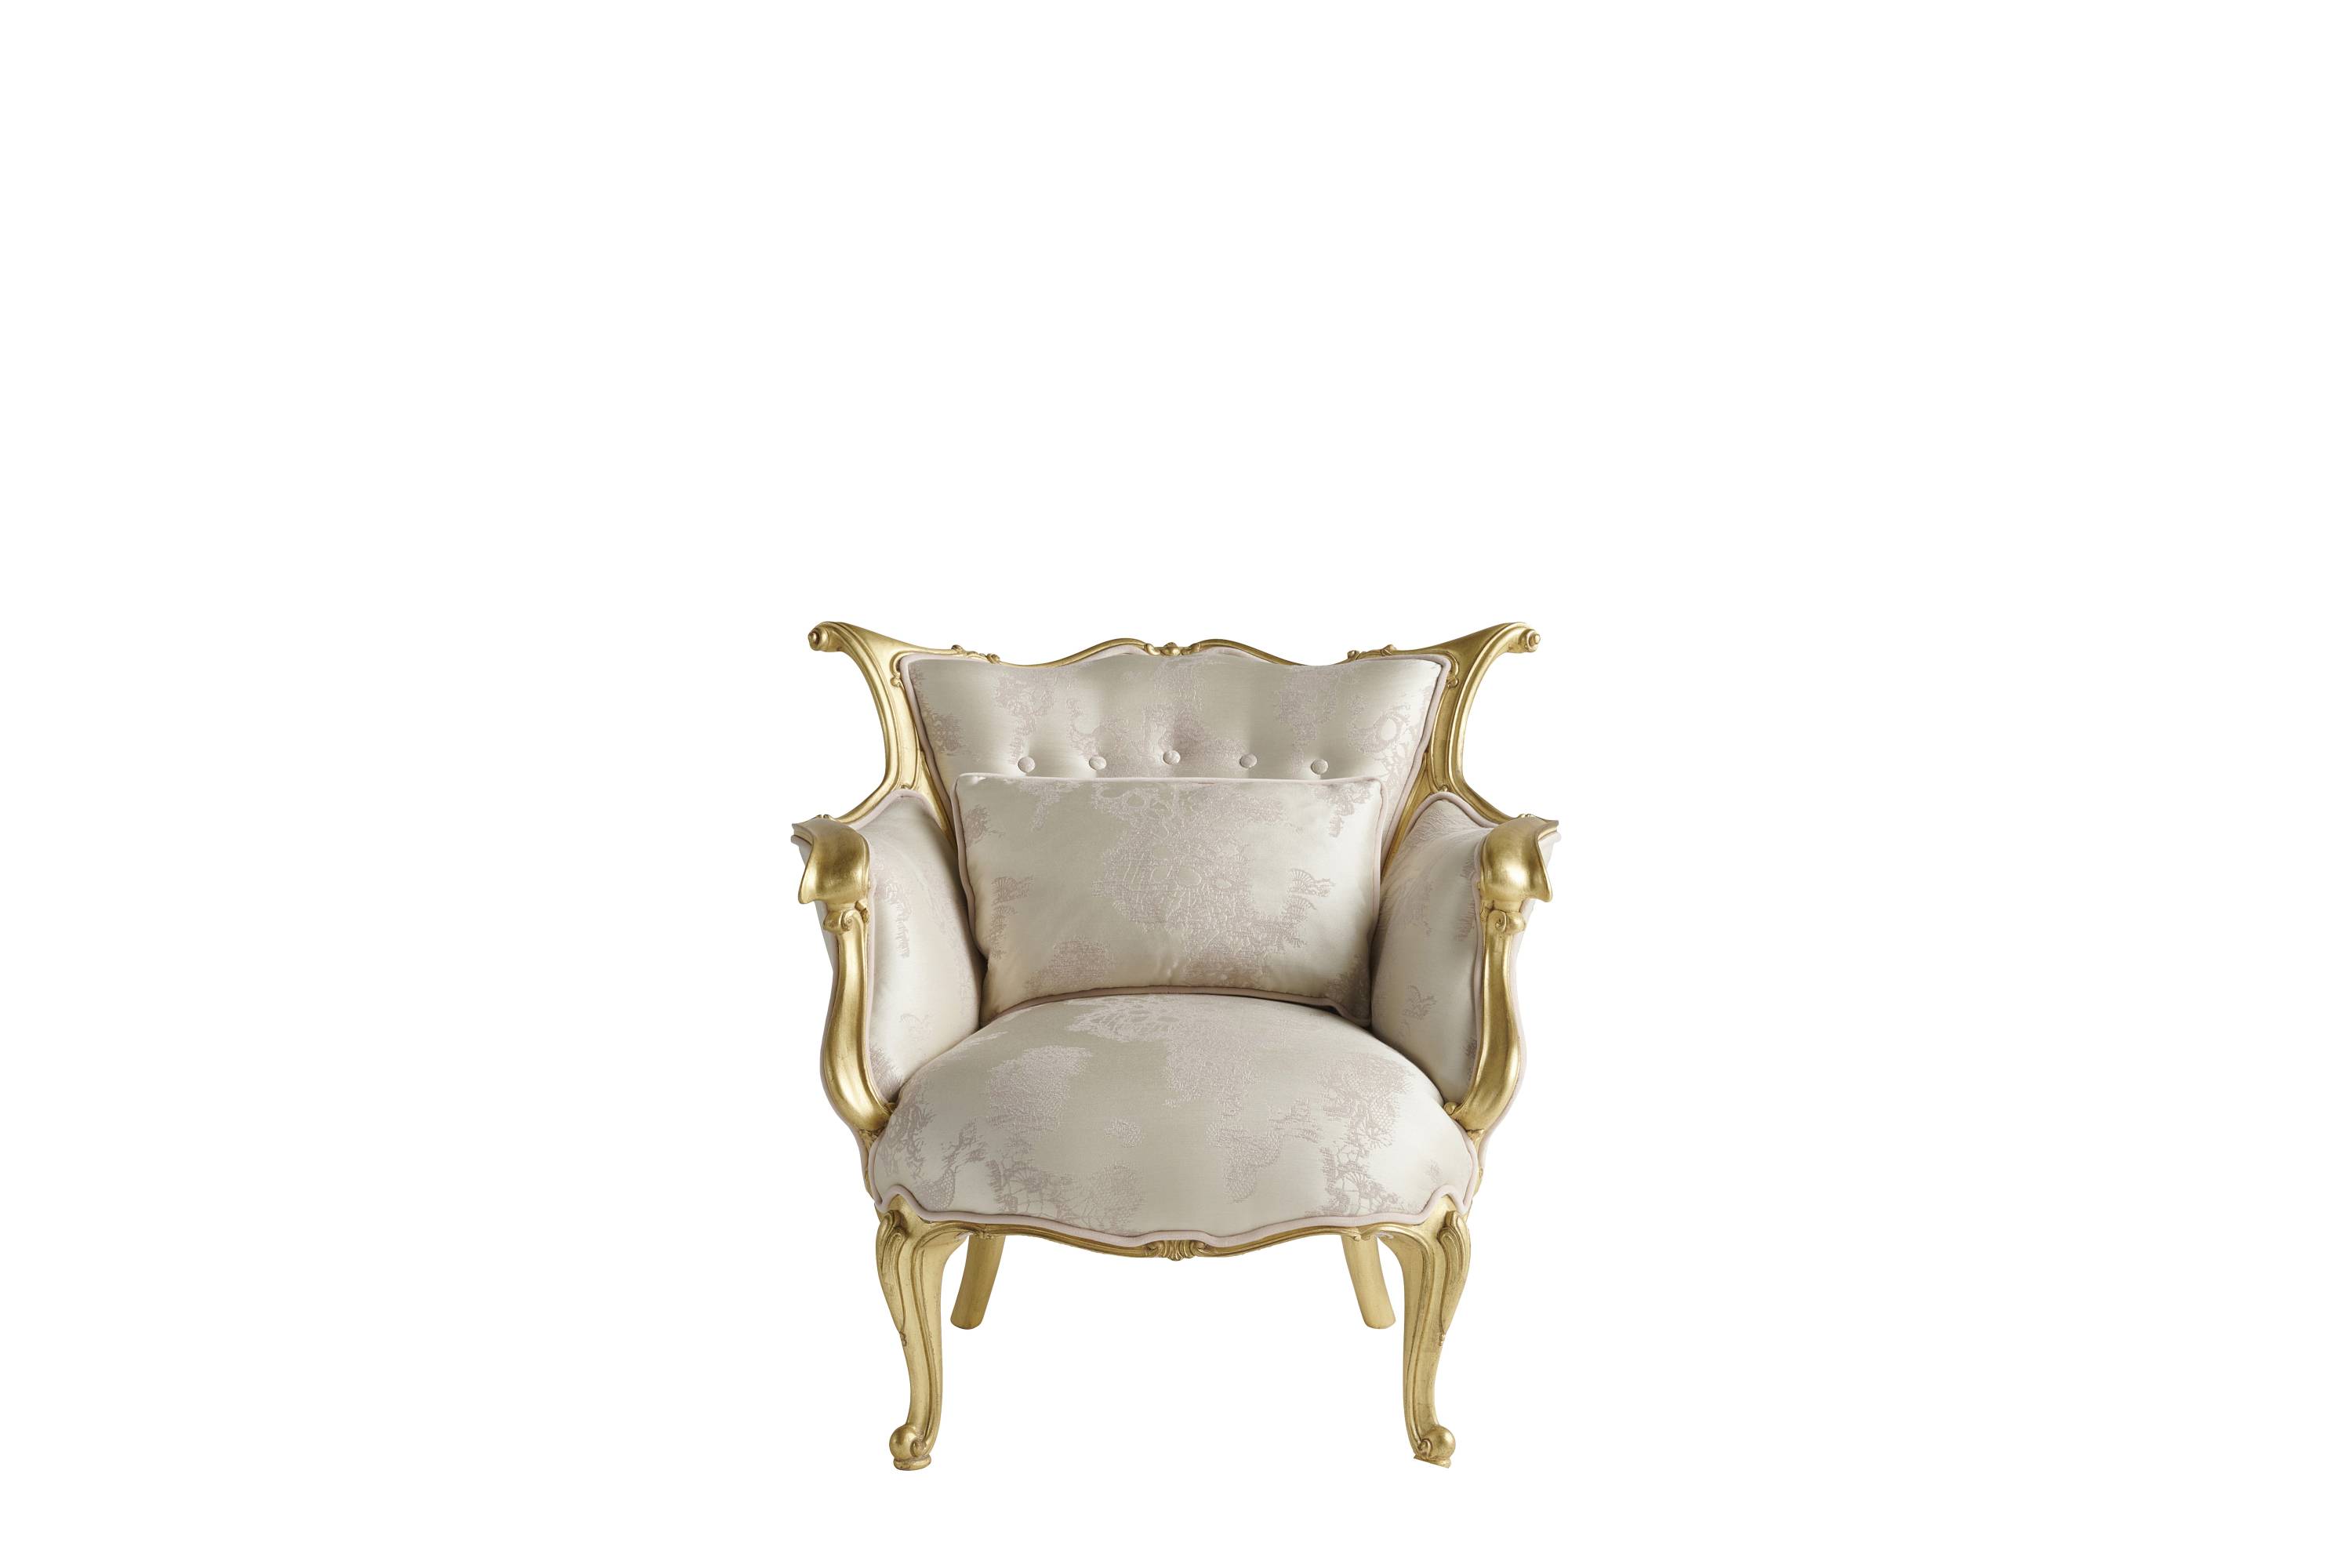 REGENCY armchair – Transform your space with luxury Made in Italy classic armchairs of Héritage collection.